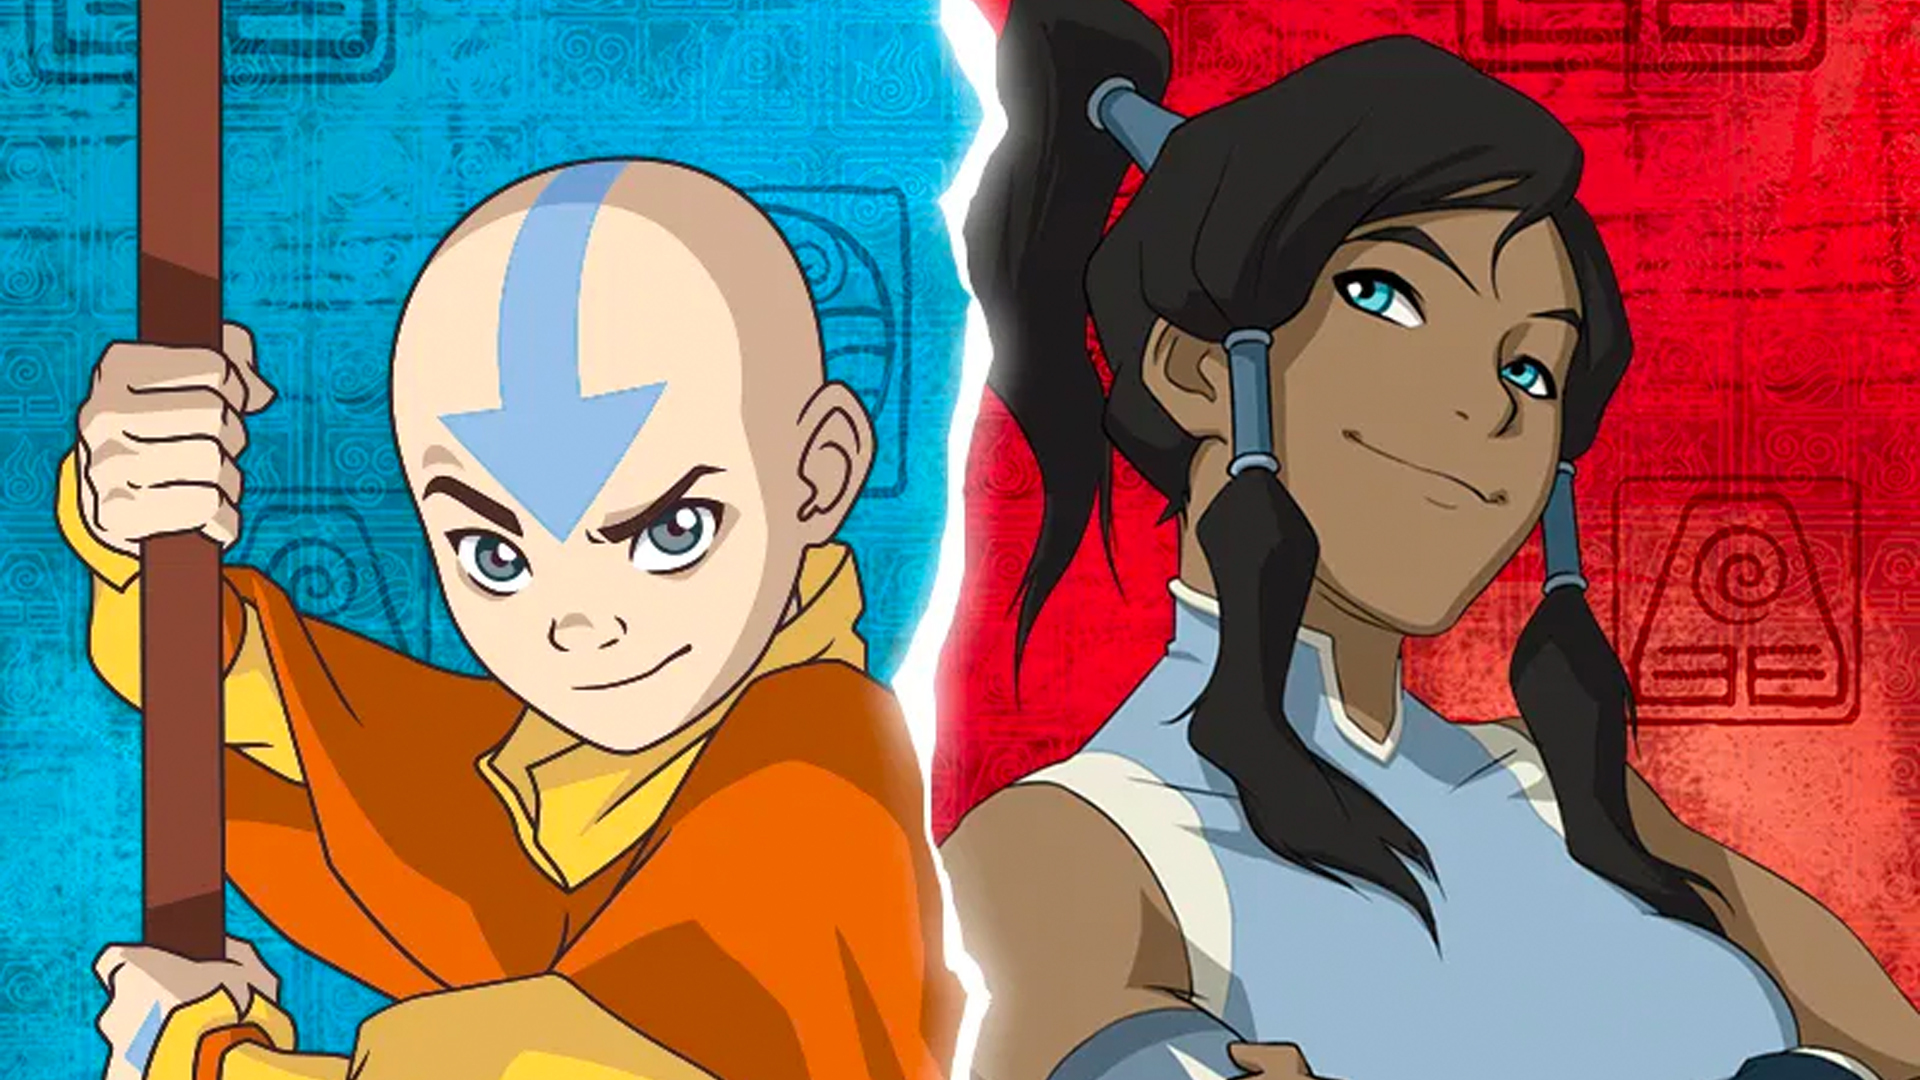 Hear Us Out The Legend of Korra Made Avatar The Last Airbender Even  Better  Rotten Tomatoes